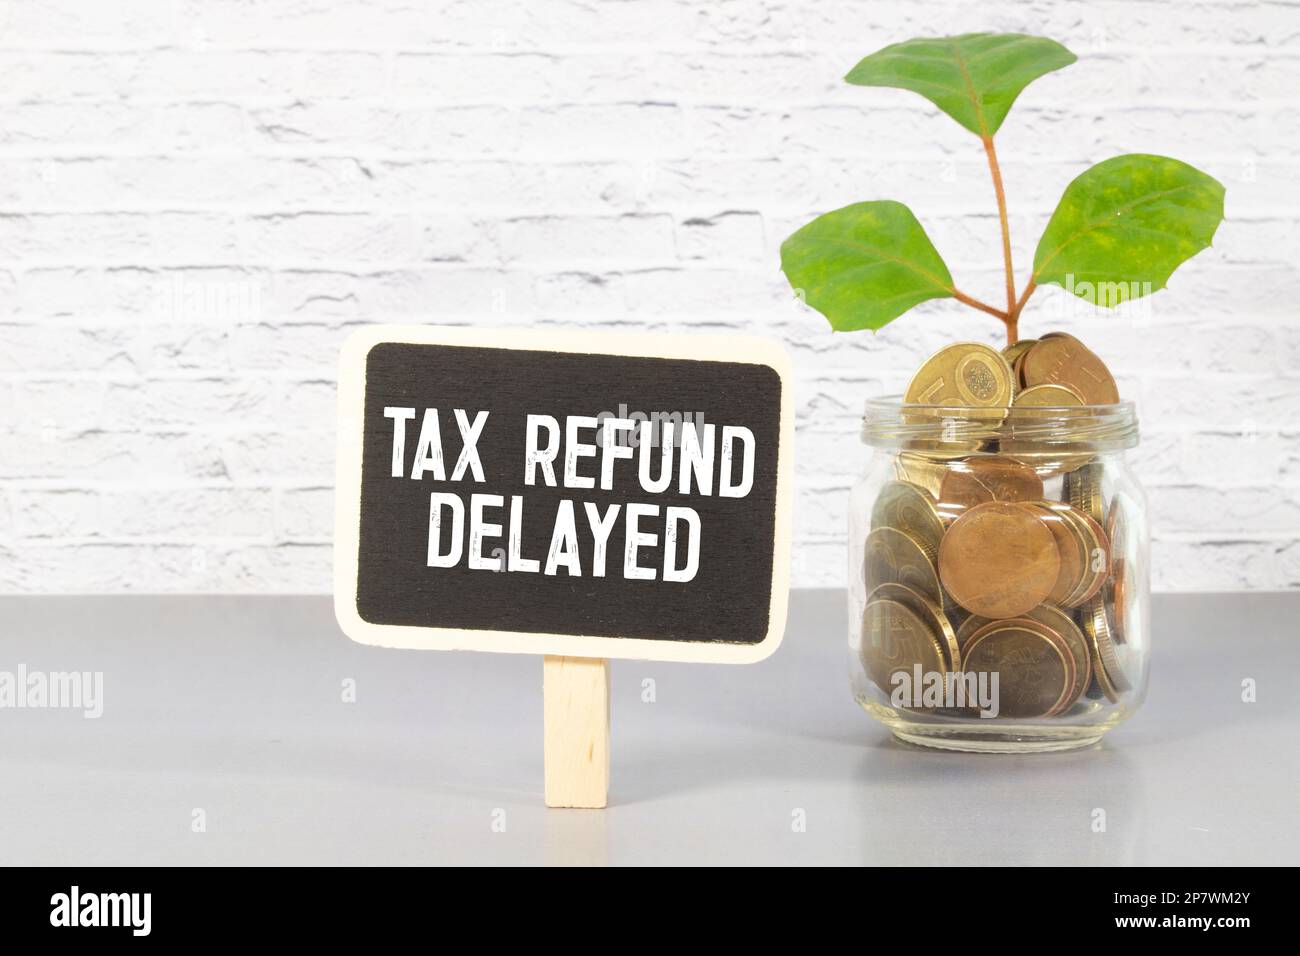 sticky-note-with-the-text-tax-refund-delayed-on-income-tax-form